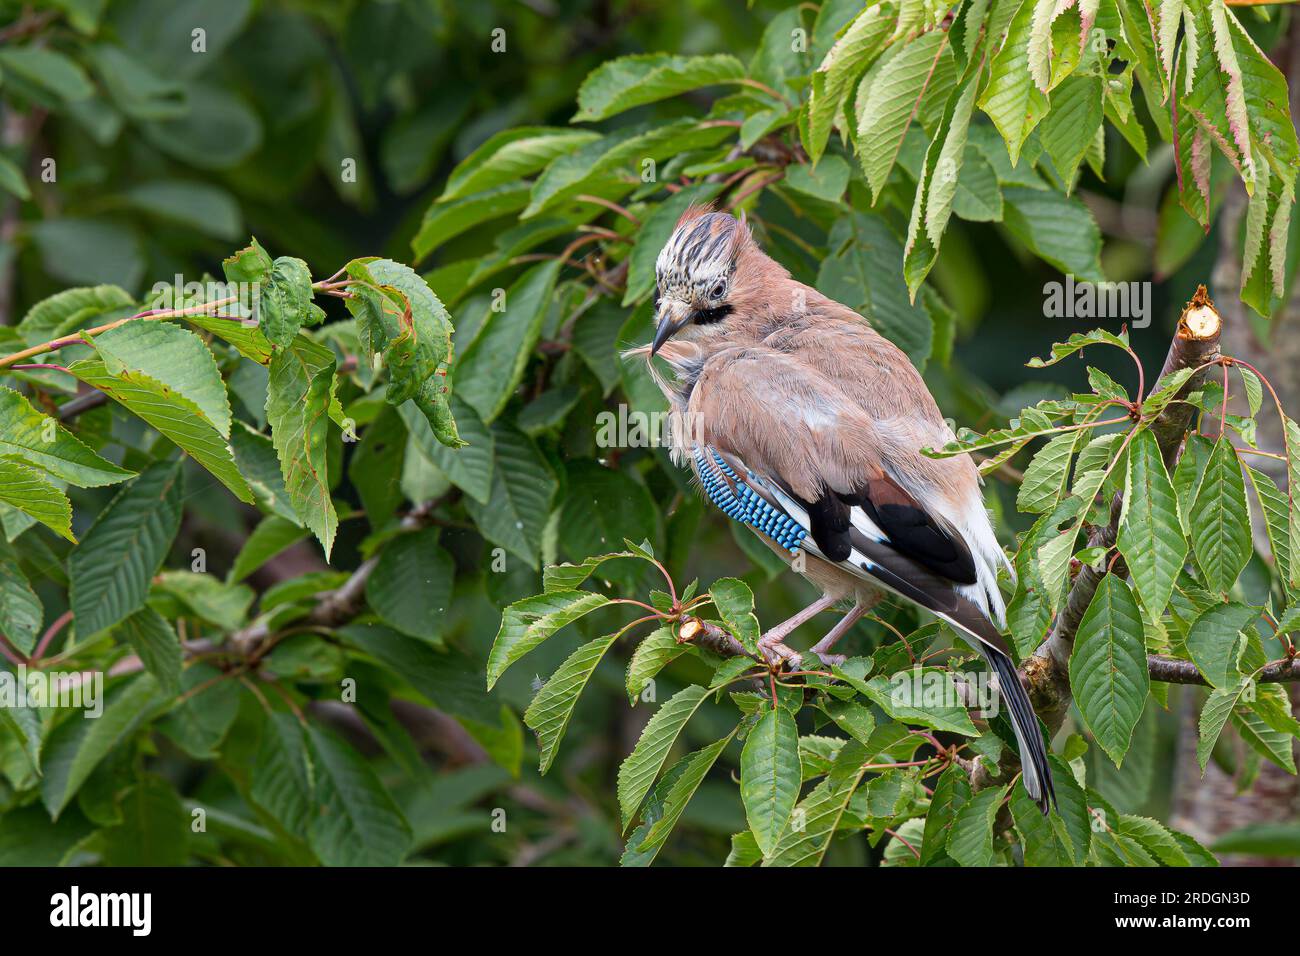 Close up of a wild, UK jay bird isolated on s tree branch preening its feathers. Stock Photo